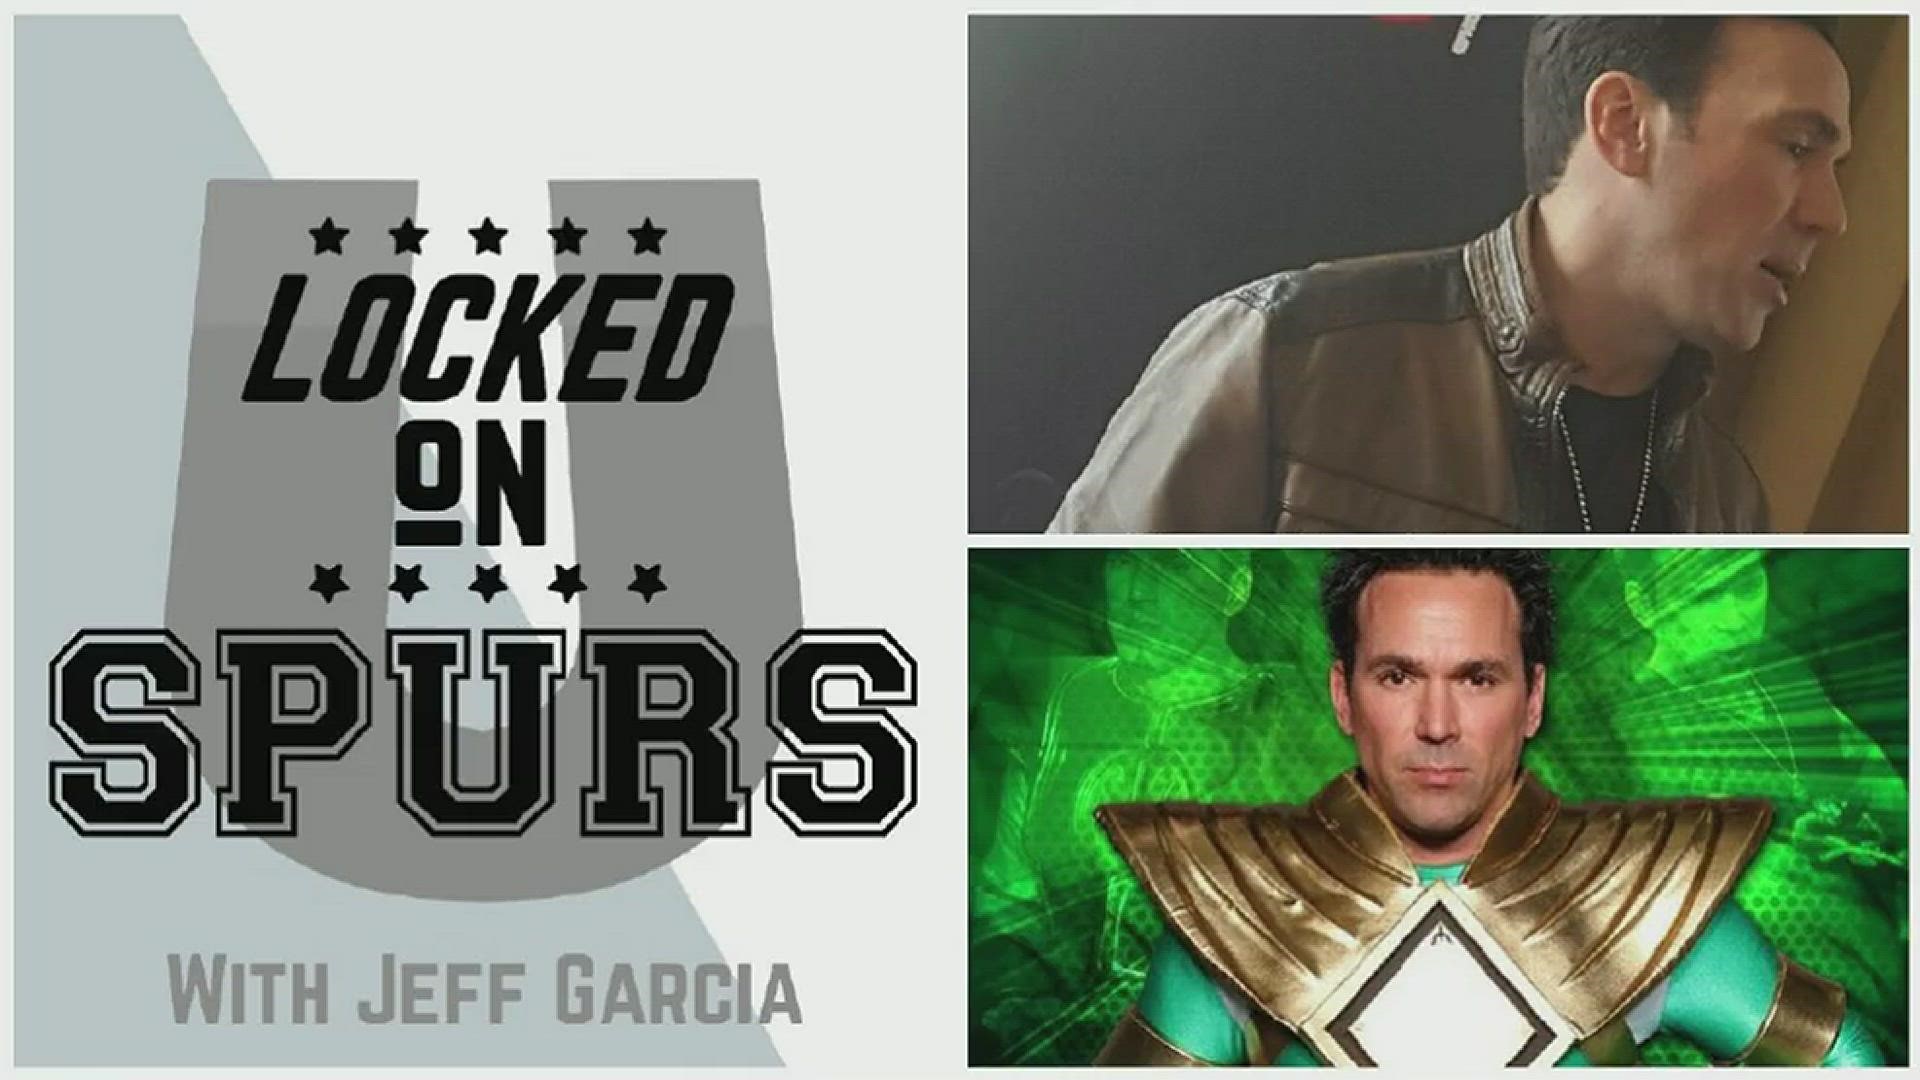 In 2017, actor Jason David Frank aka the Green Power Ranger made a surprise visit with Locked On Spurs.